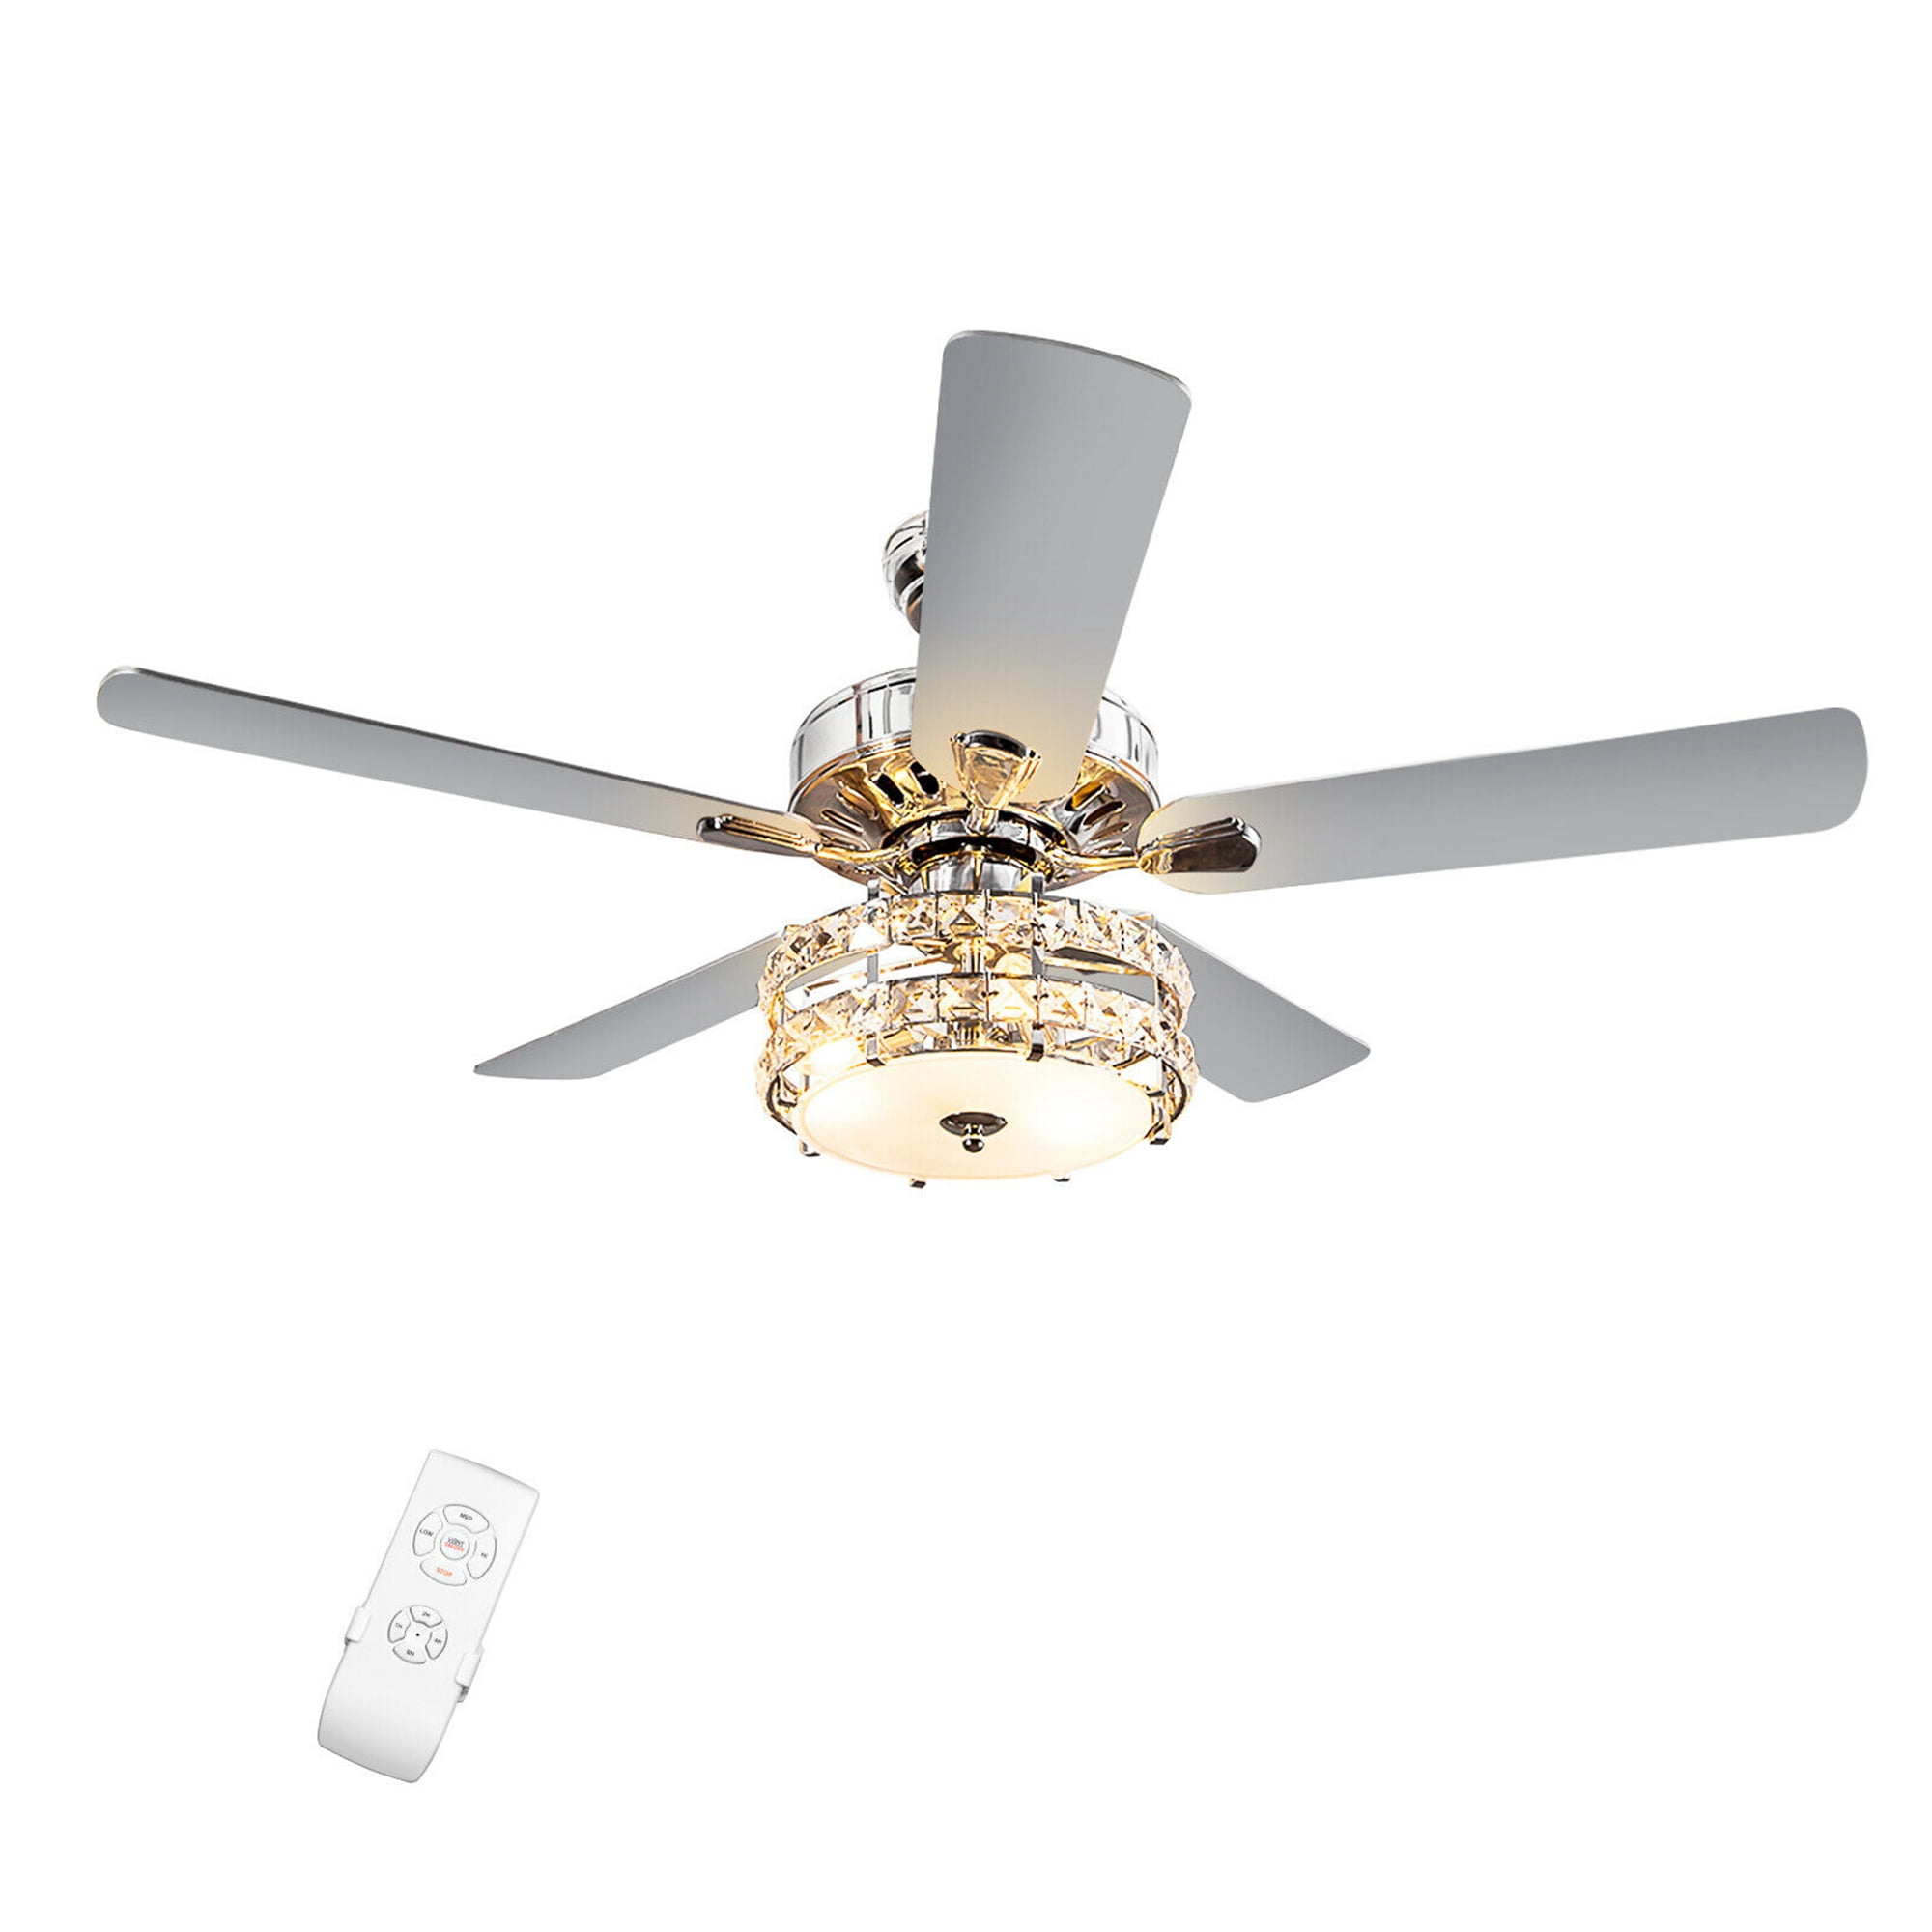 Details about   Costway 52" Low Profile Ceiling Fan w/ LED Light and Remote Reversible Blades 